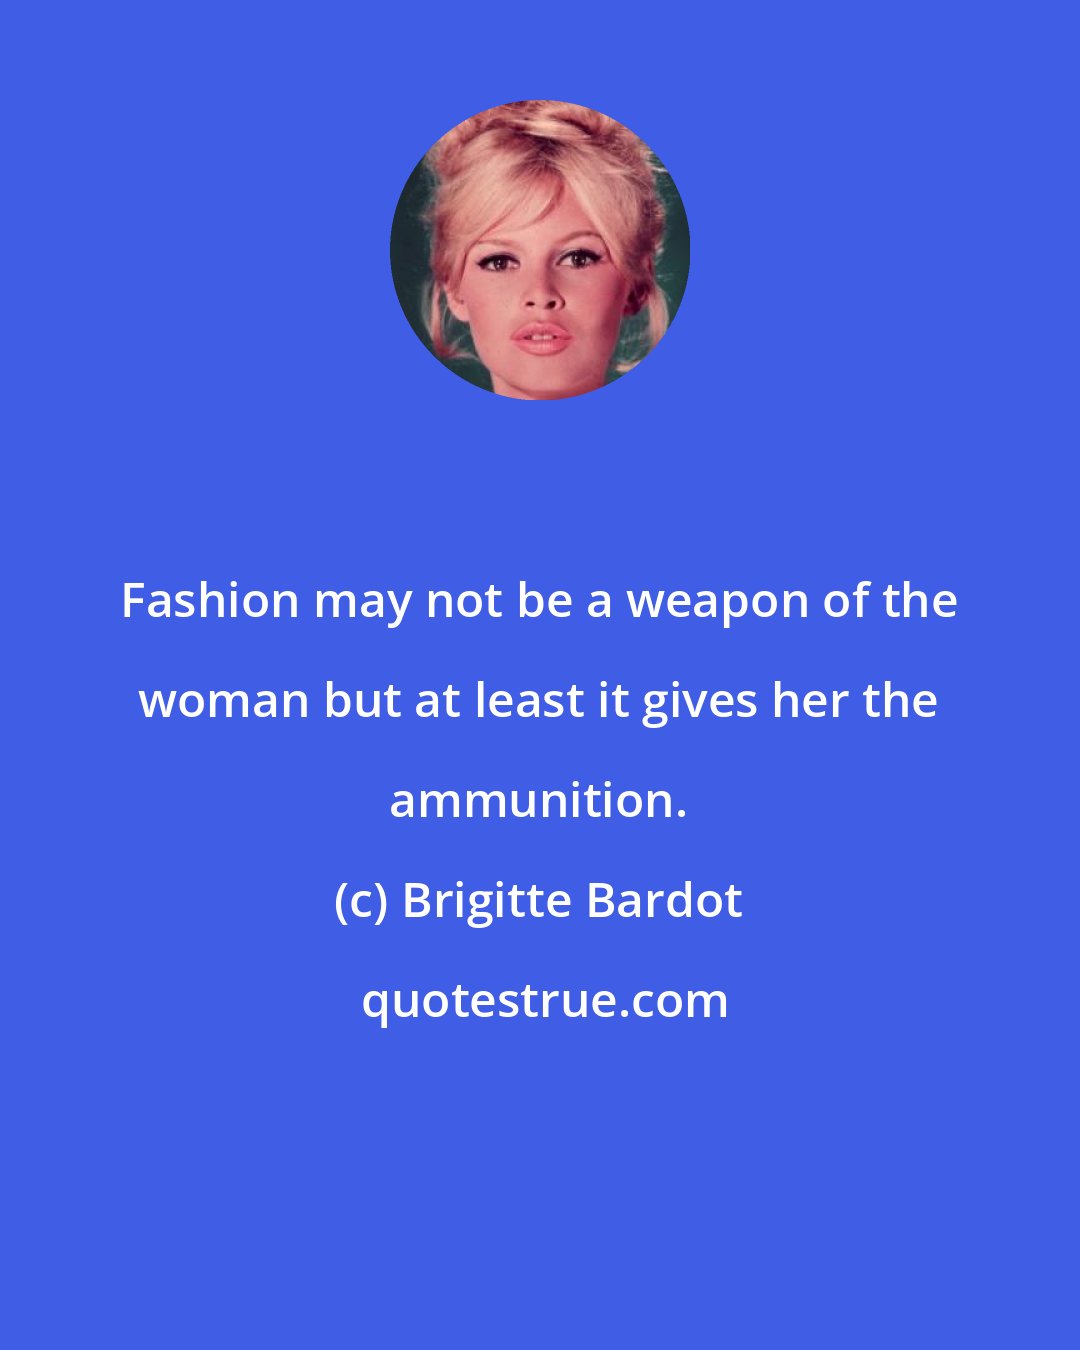 Brigitte Bardot: Fashion may not be a weapon of the woman but at least it gives her the ammunition.